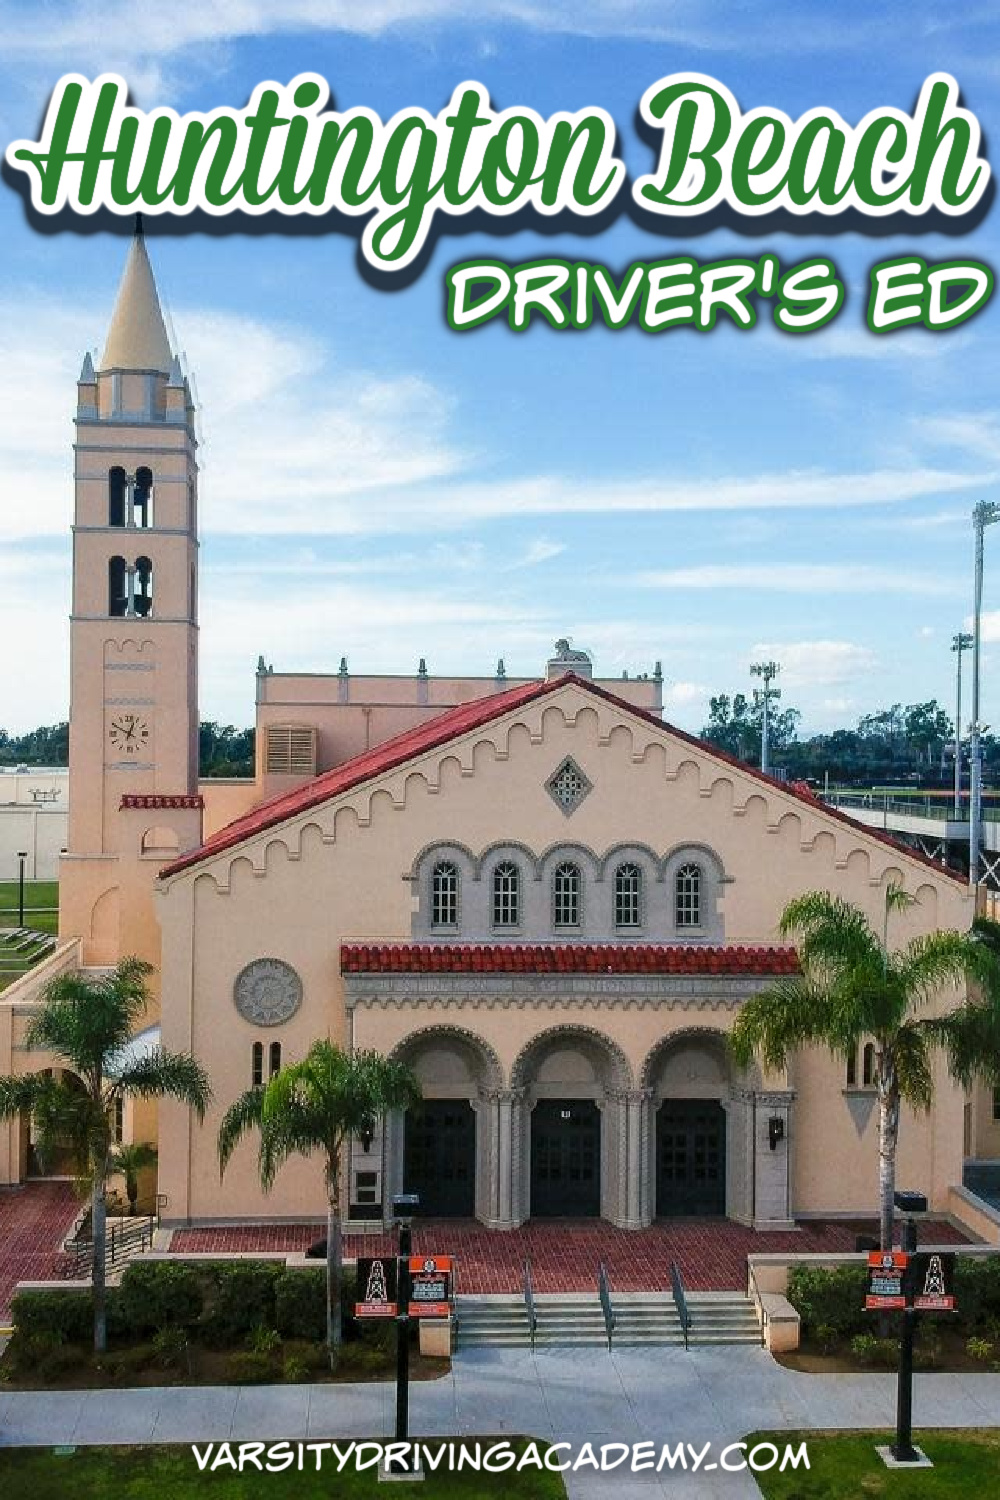 The best Huntington Beach High School driver's ed is provided by Varsity Driving Academy, where students learn defensive driving alongside the basics.